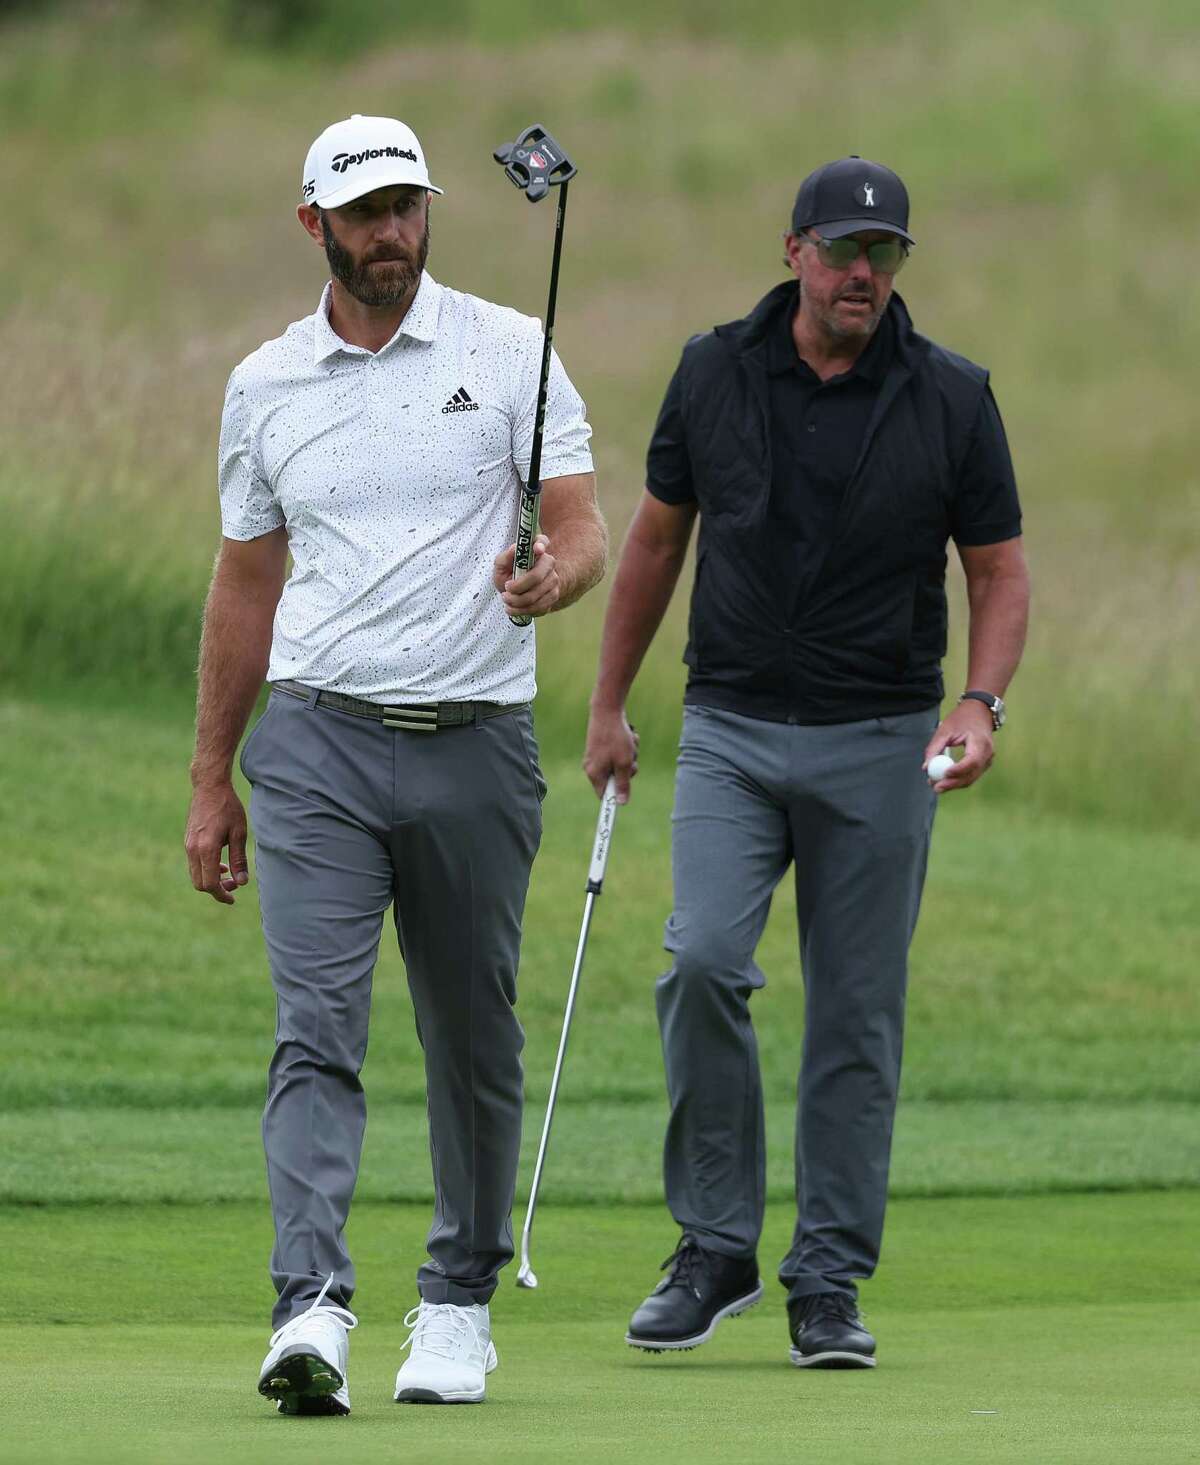 ST ALBANS, ENGLAND - JUNE 09: Dustin Johnson and Phil Mickelson of the United States pictured on the 4th green during day one of the LIV Golf Invitational at The Centurion Club on June 09, 2022 in St Albans, England. (Photo by Matthew Lewis/Getty Images)